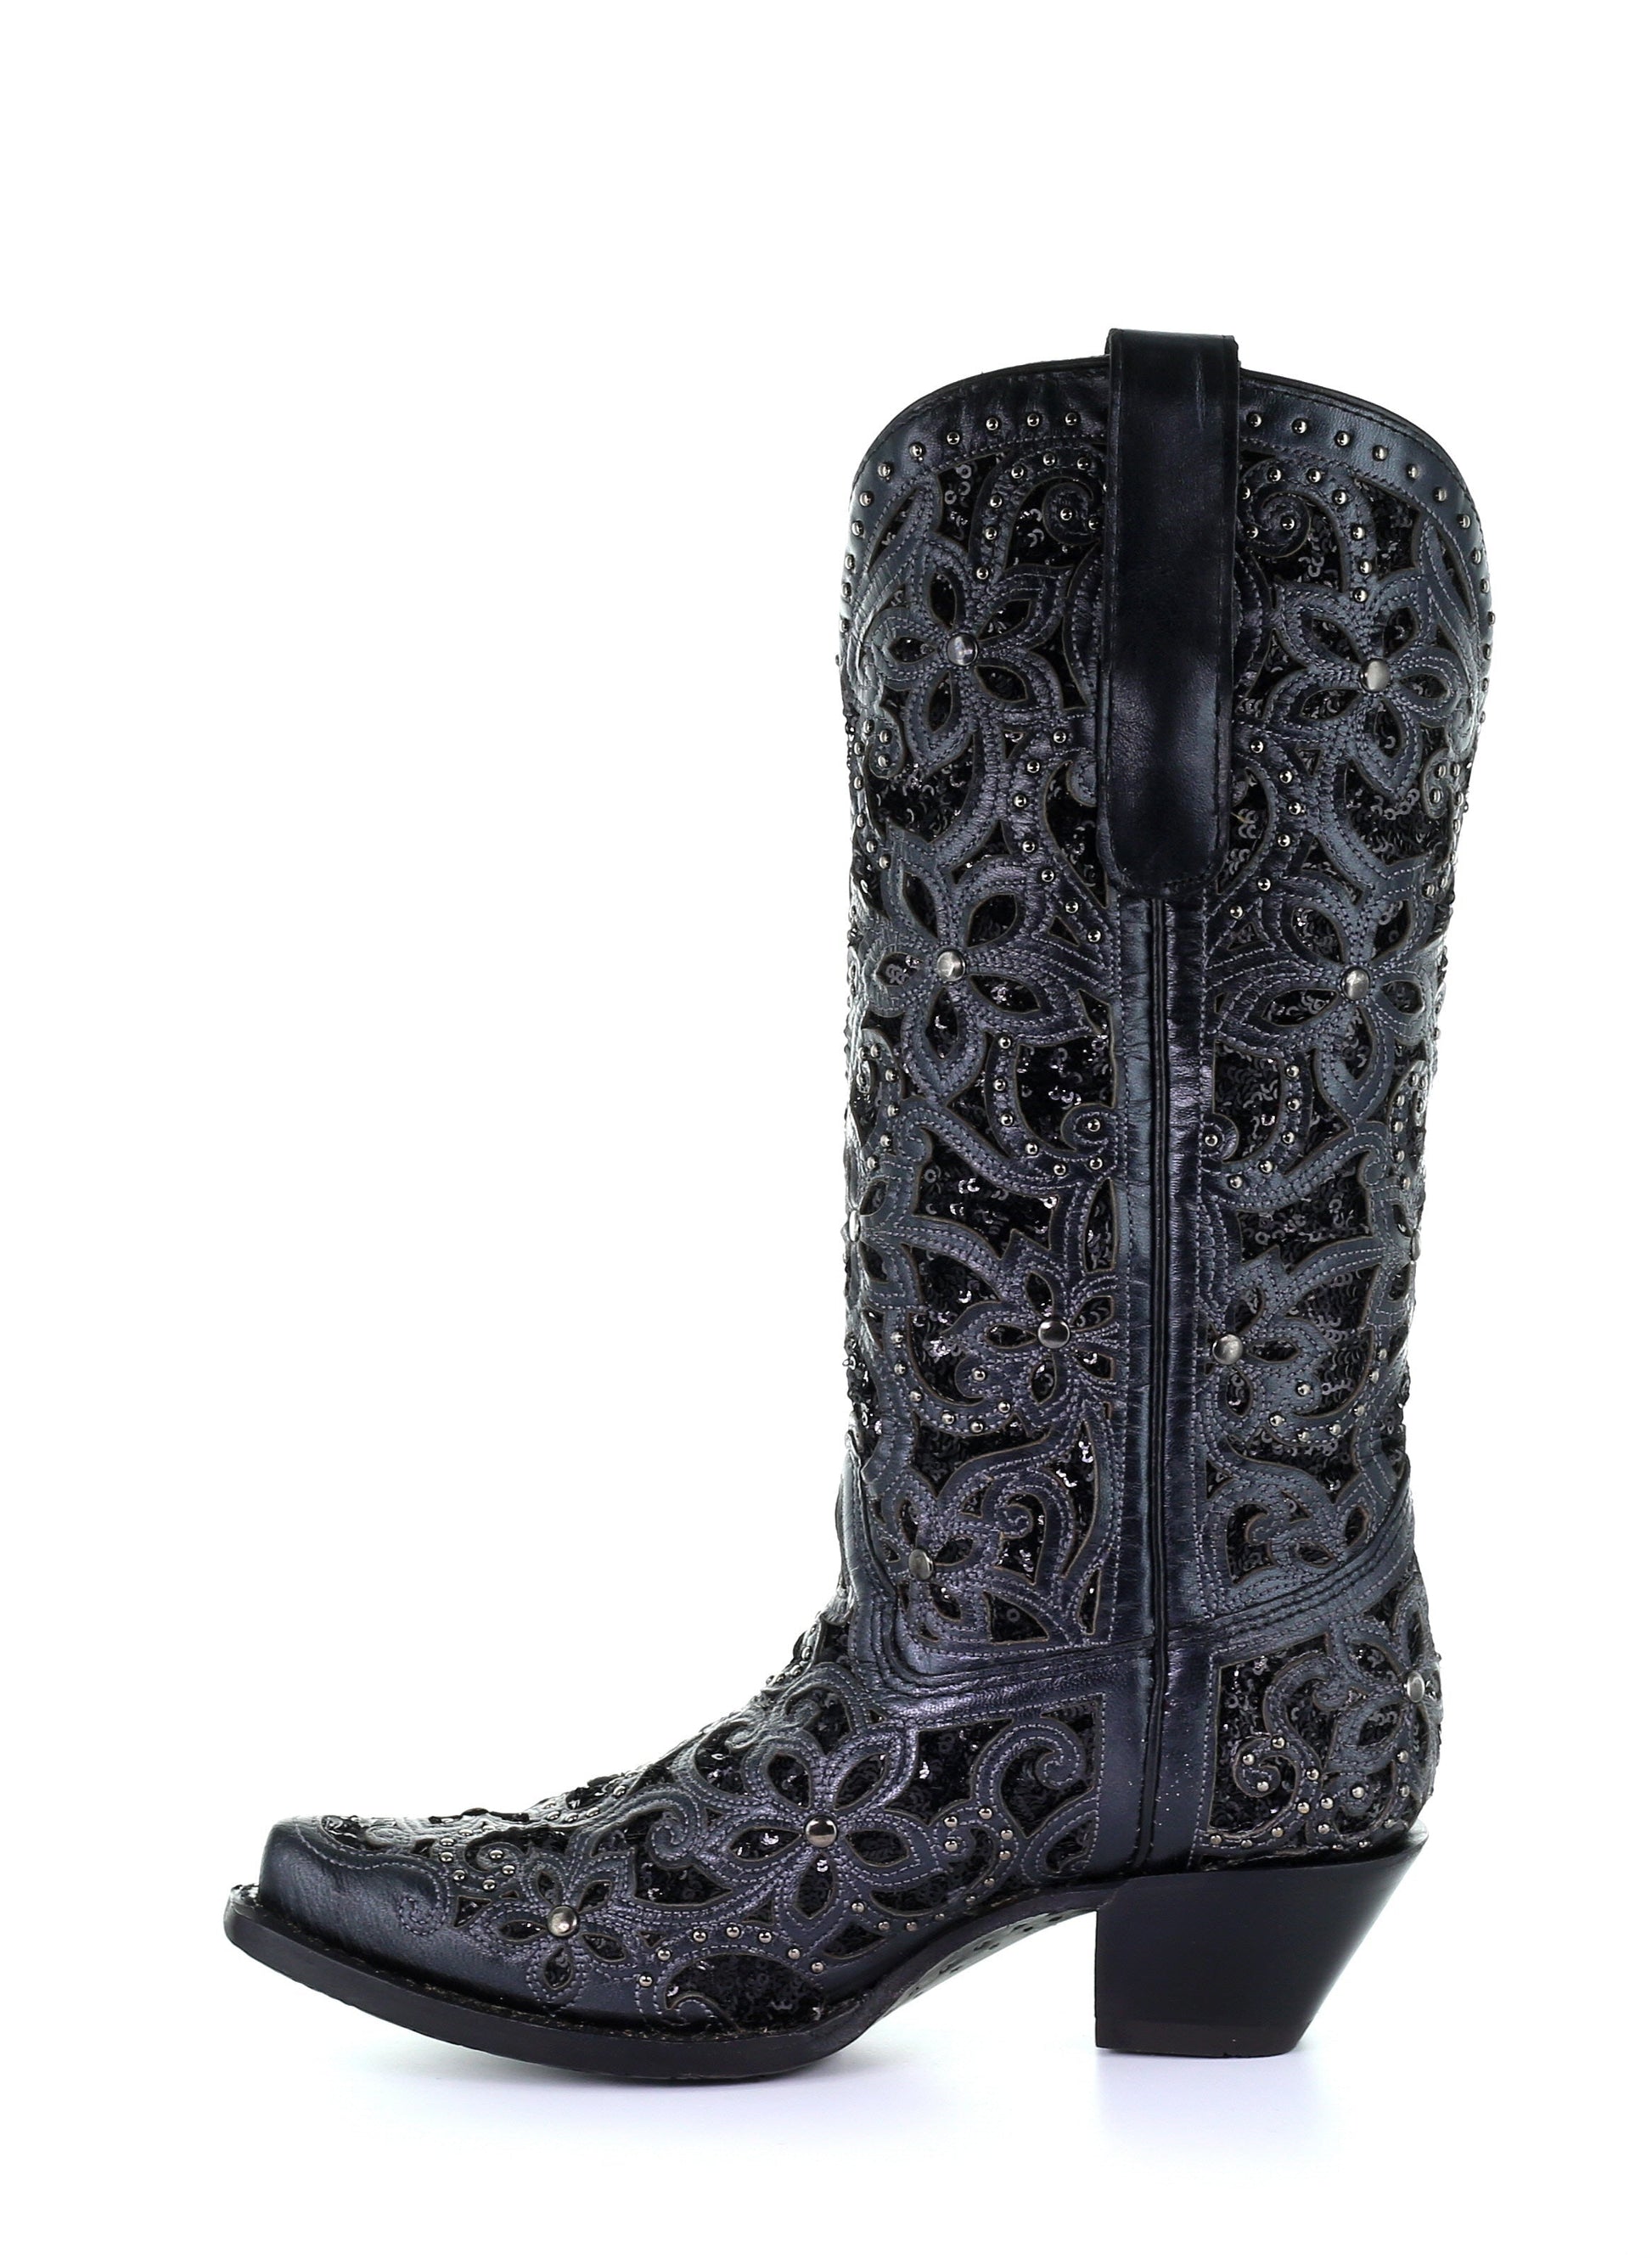 A3752-M BOOT CORRAL BLACK LD BLACK INLAY & EMBROIDERY & STUDS-Kuet